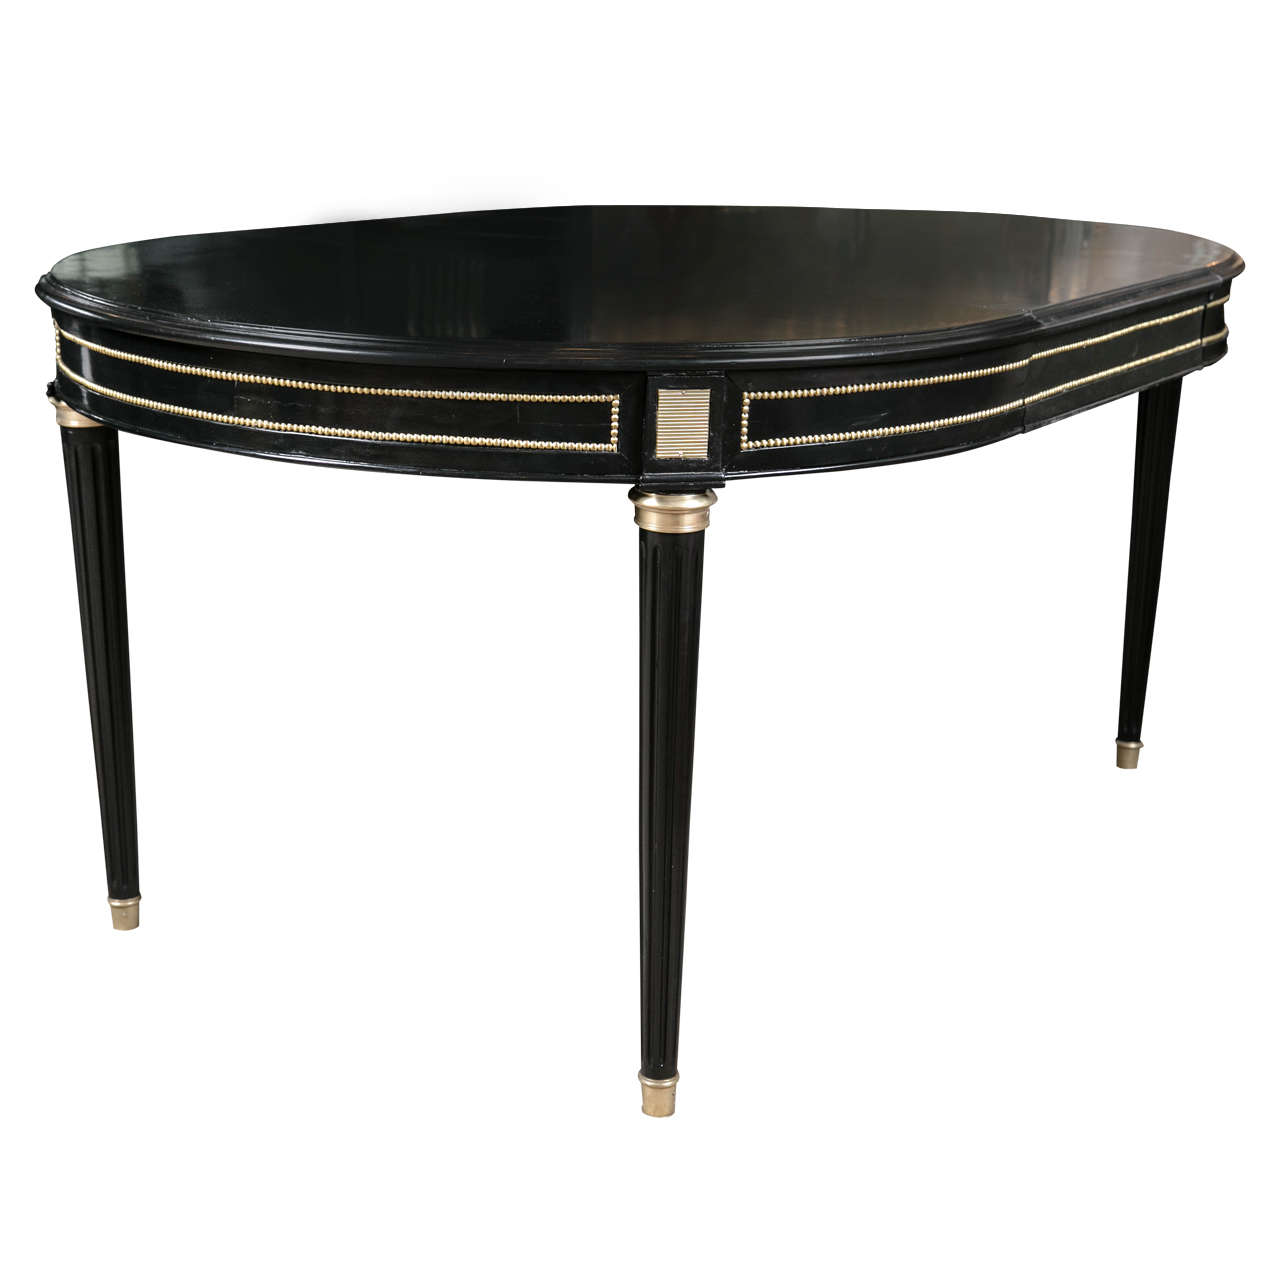 Ebonized Three-Leaf Louis XVI Style Dining Table Attributed to Jansen